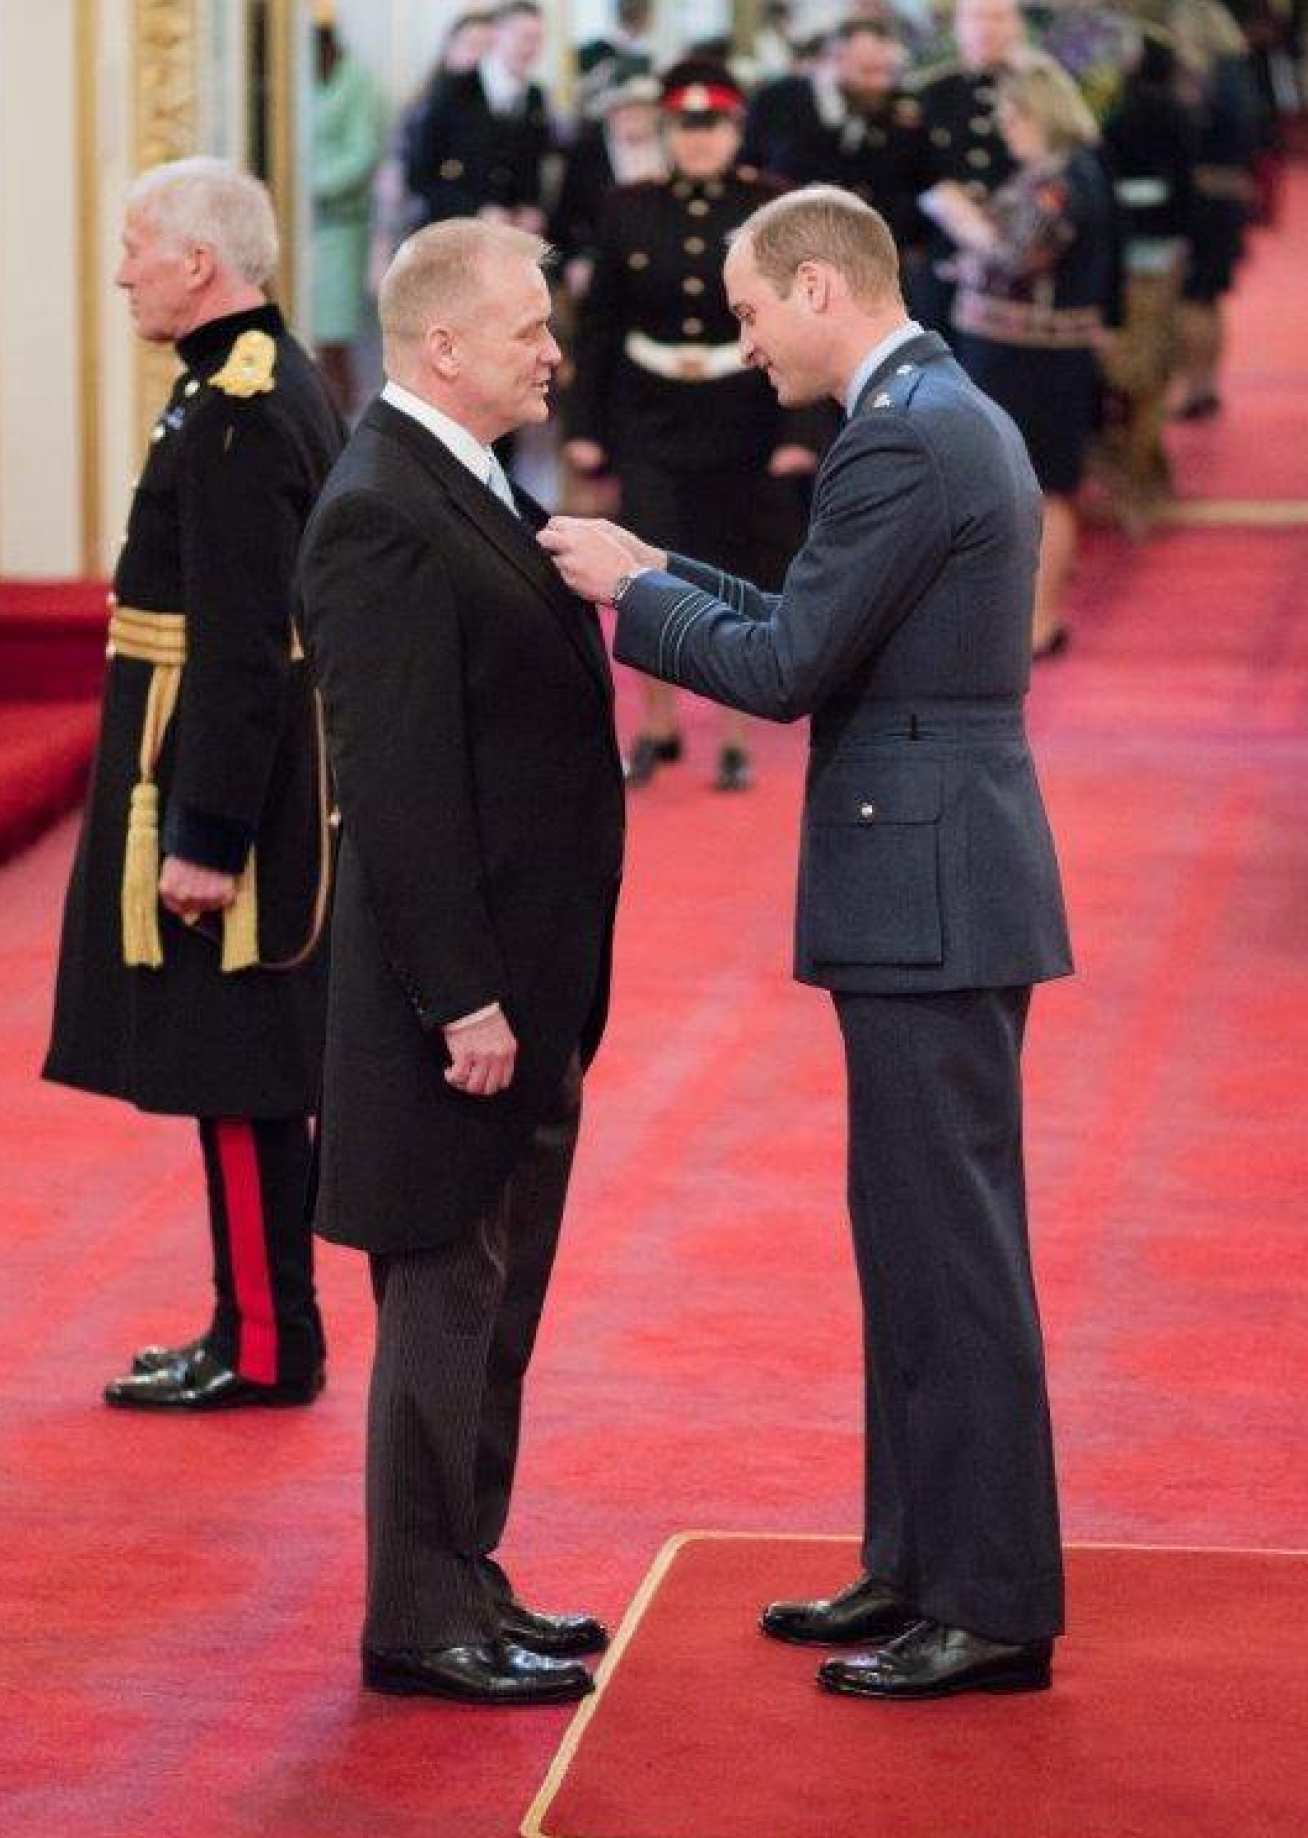 rofessor Tom Welton receives his OBE from Prince William